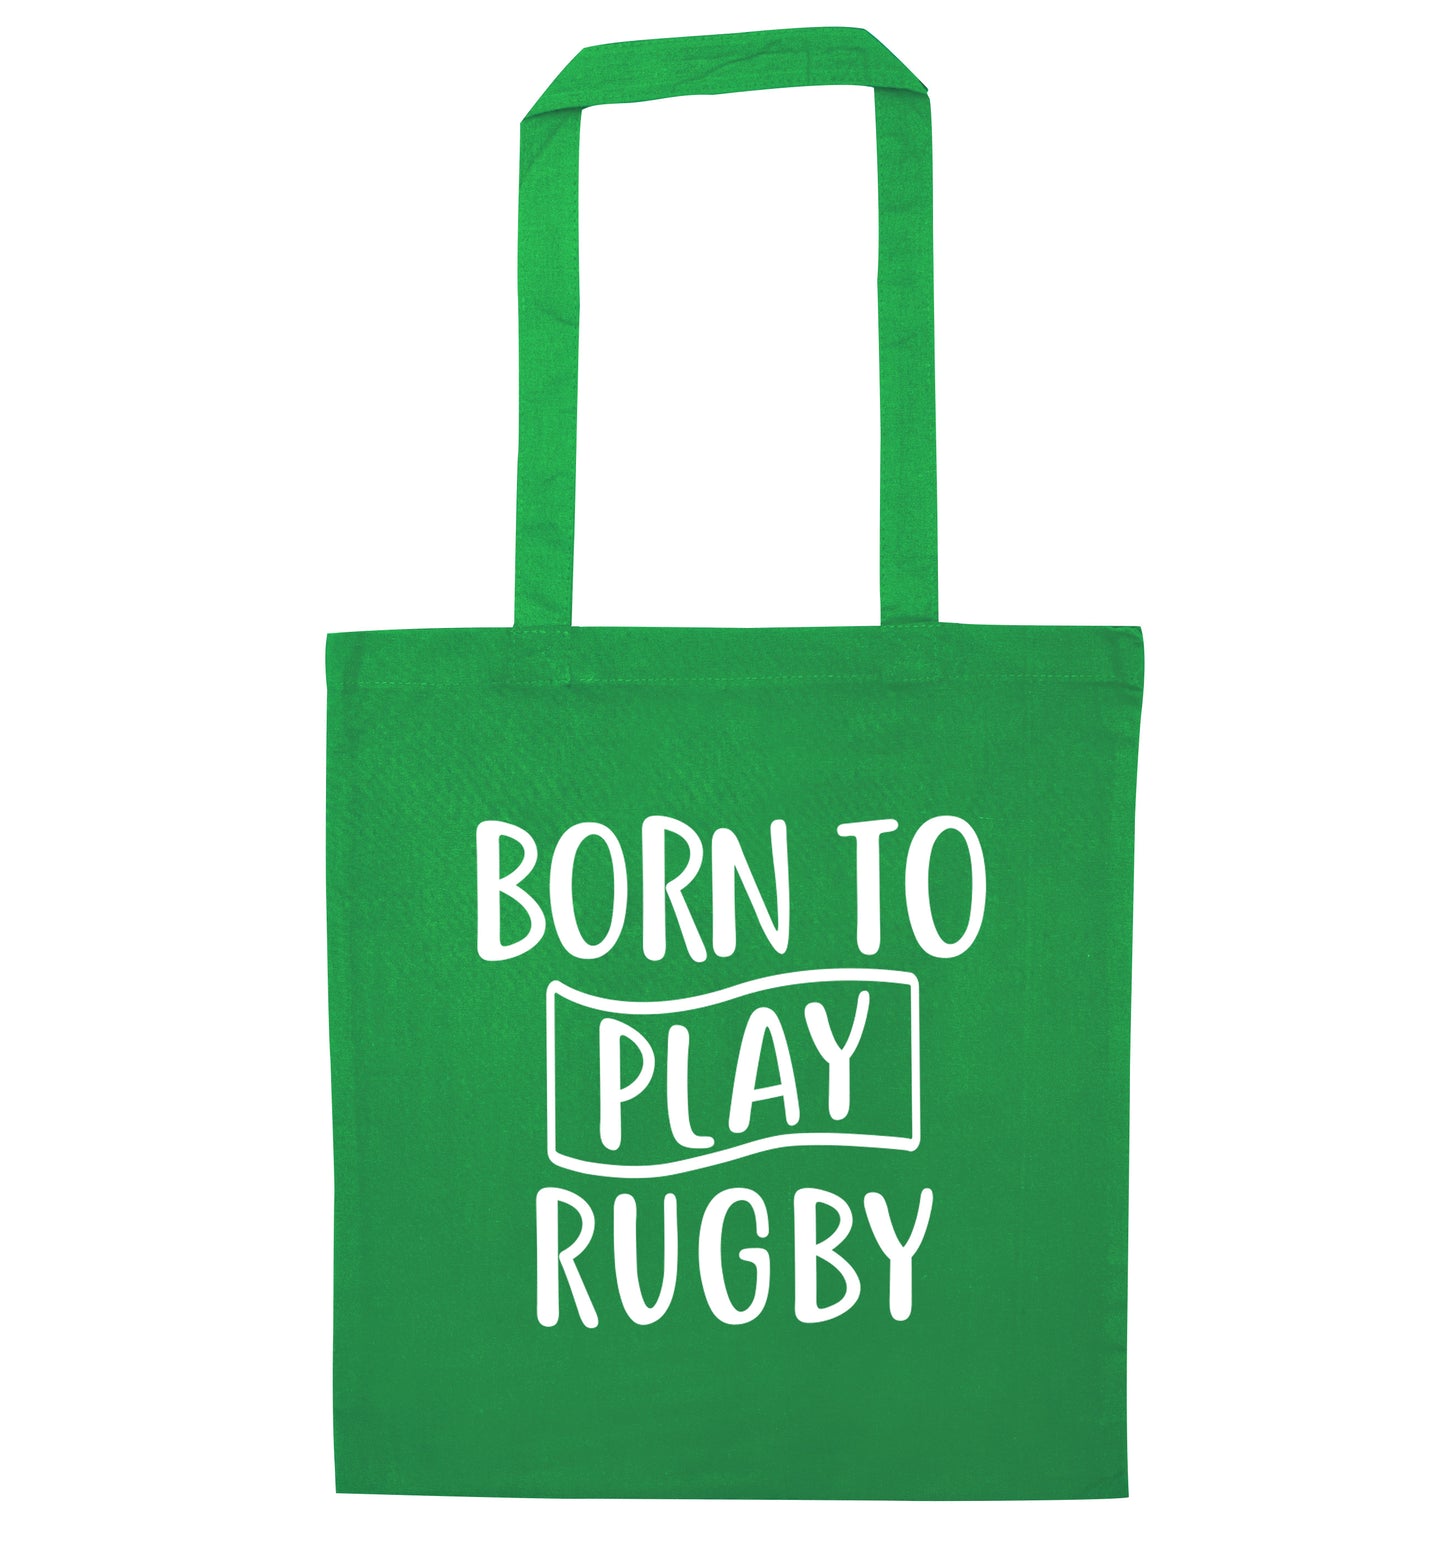 Born to play rugby green tote bag